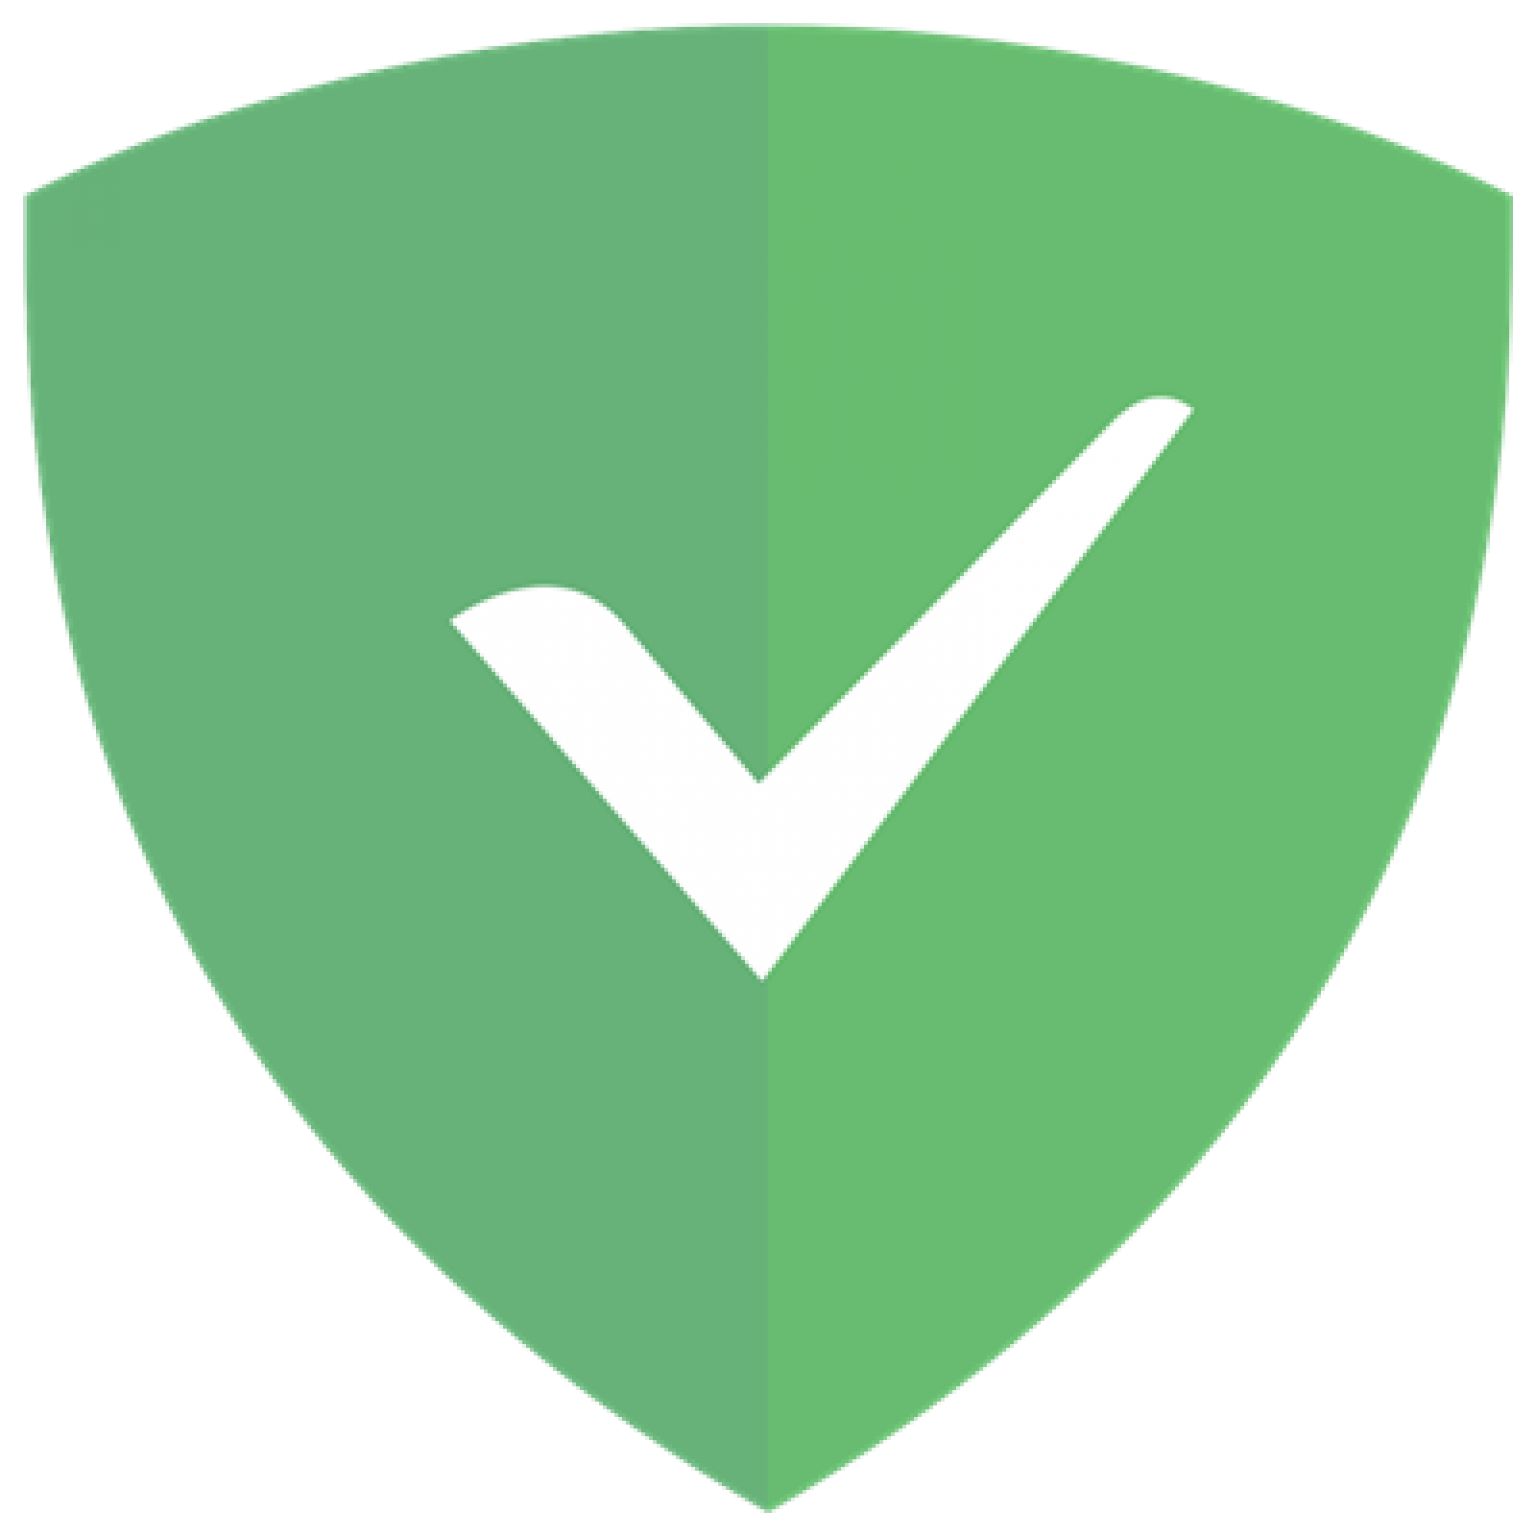 adguard download review